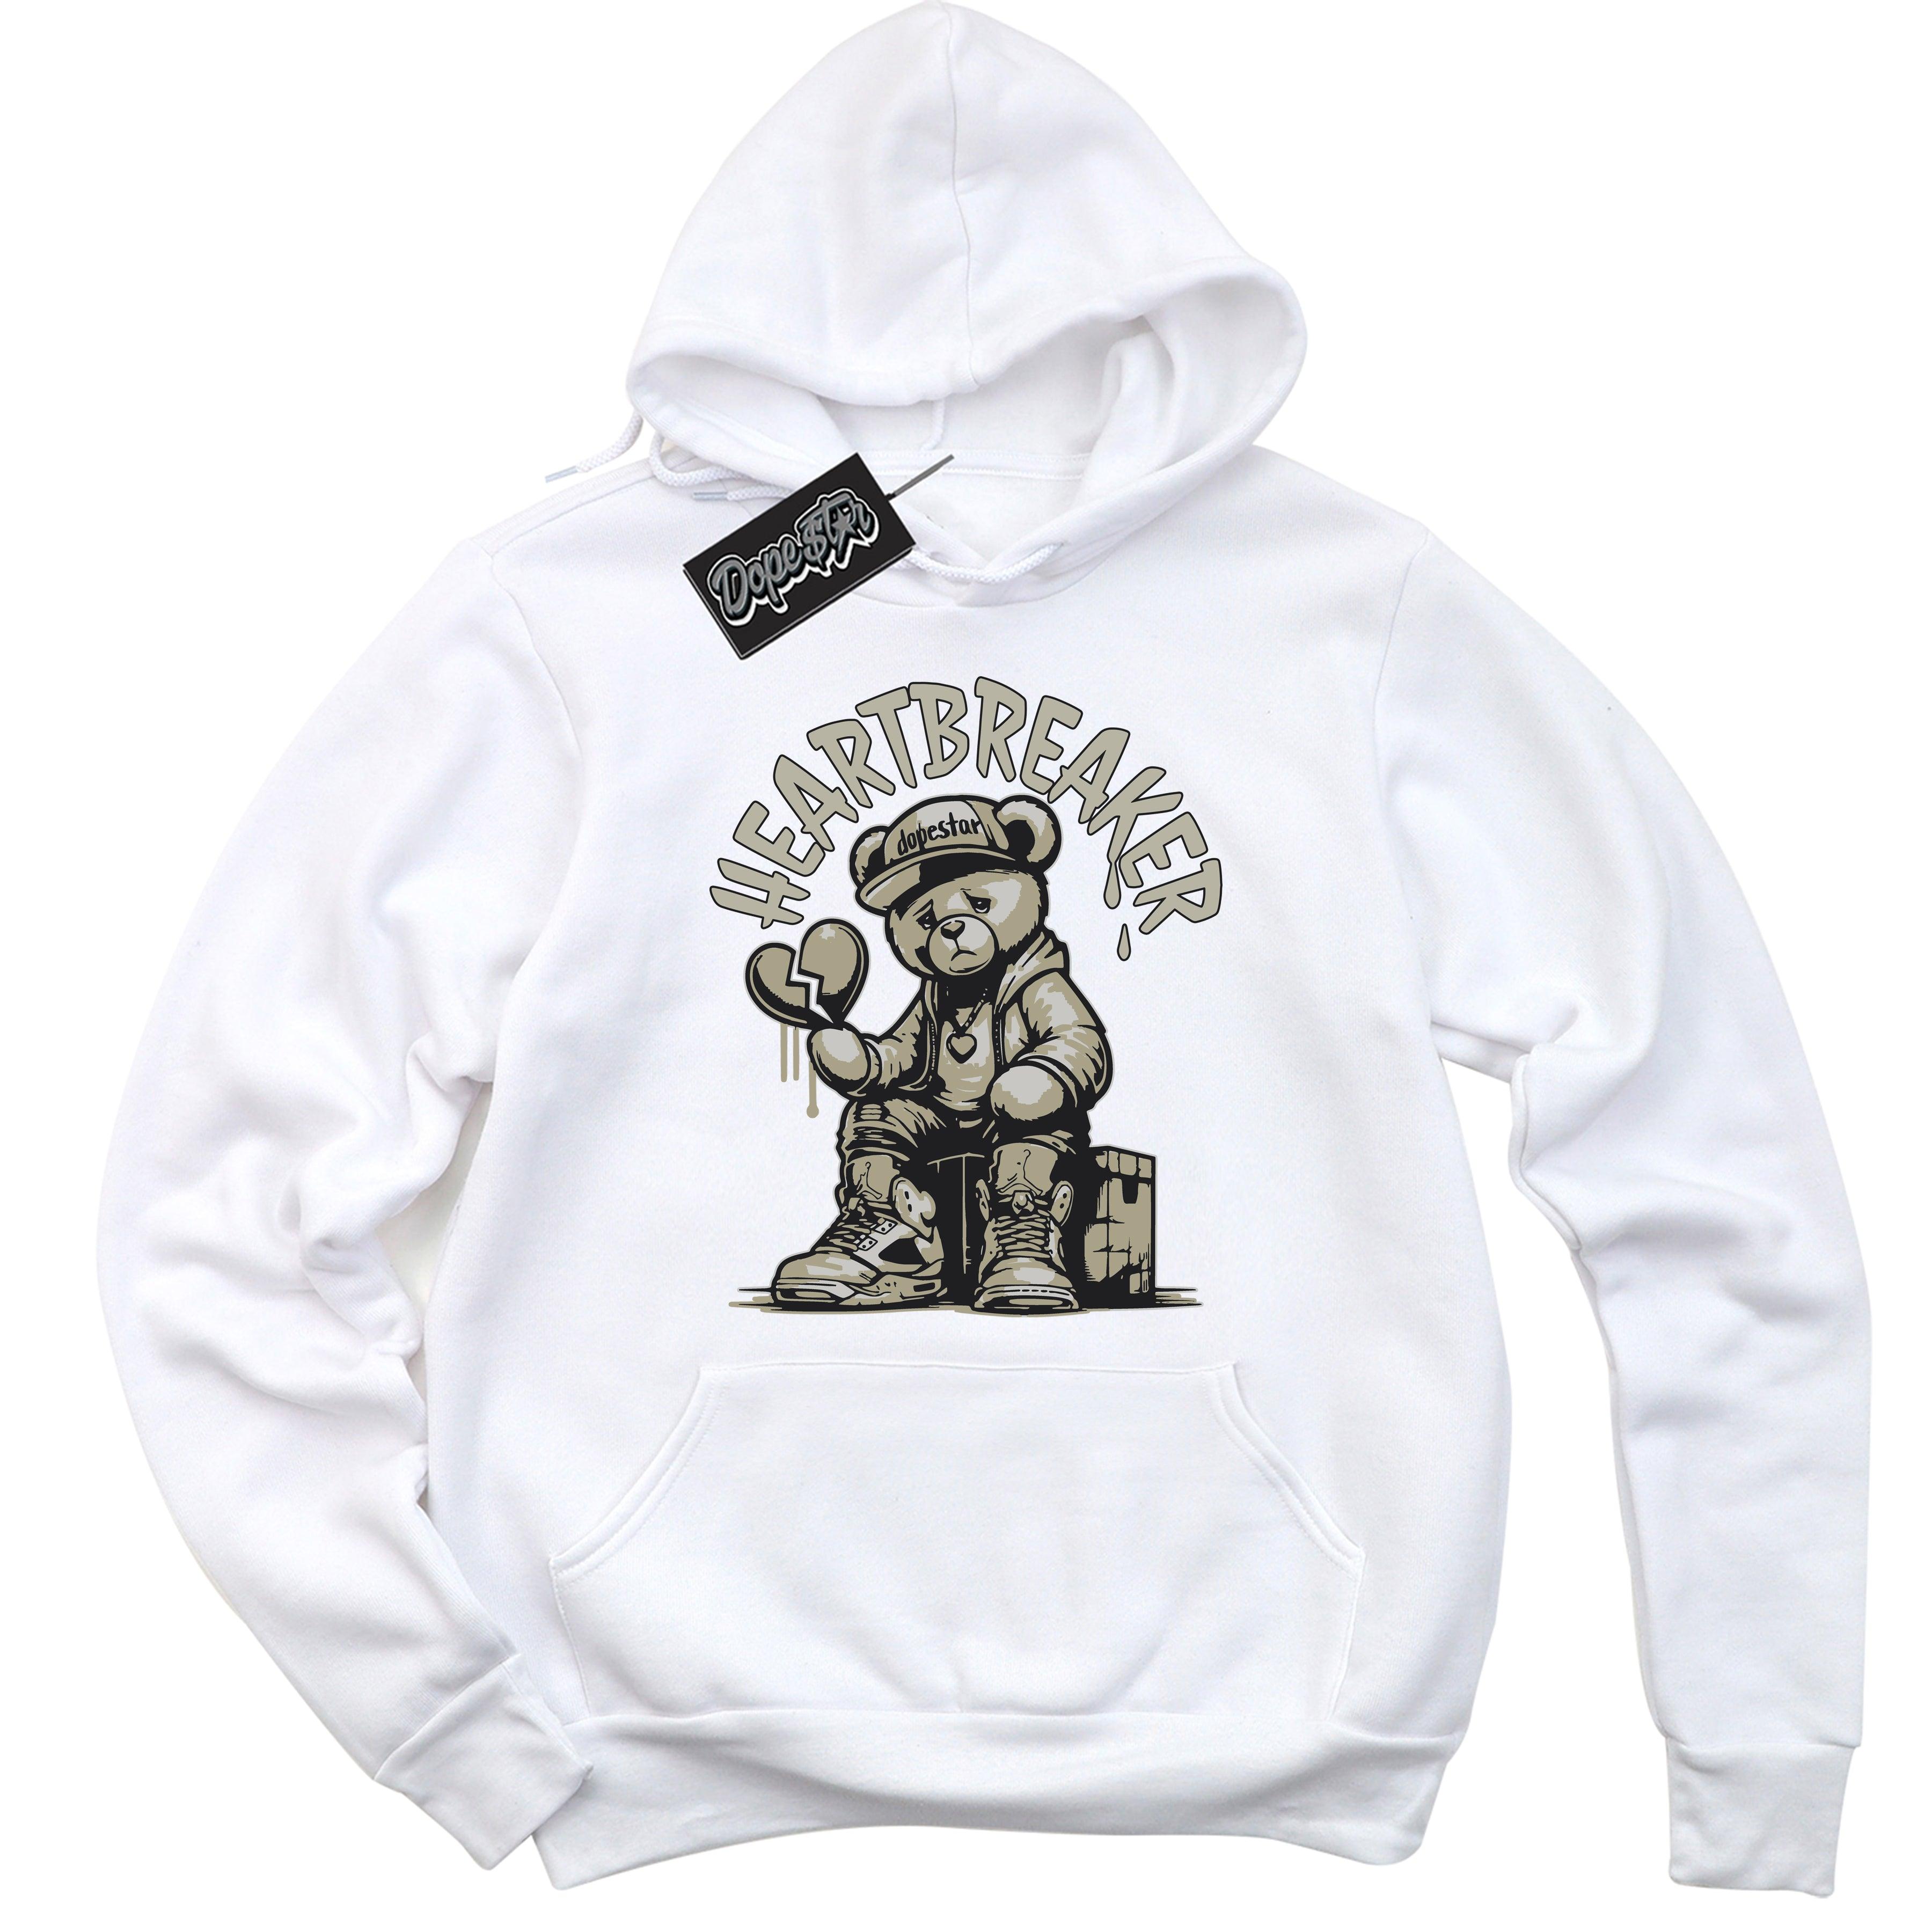 Cool White Hoodie With Heartbreaker Bear design That Perfectly Matches ADIDAS YEEZY BOOST 350 V2 SLATE Sneakers.